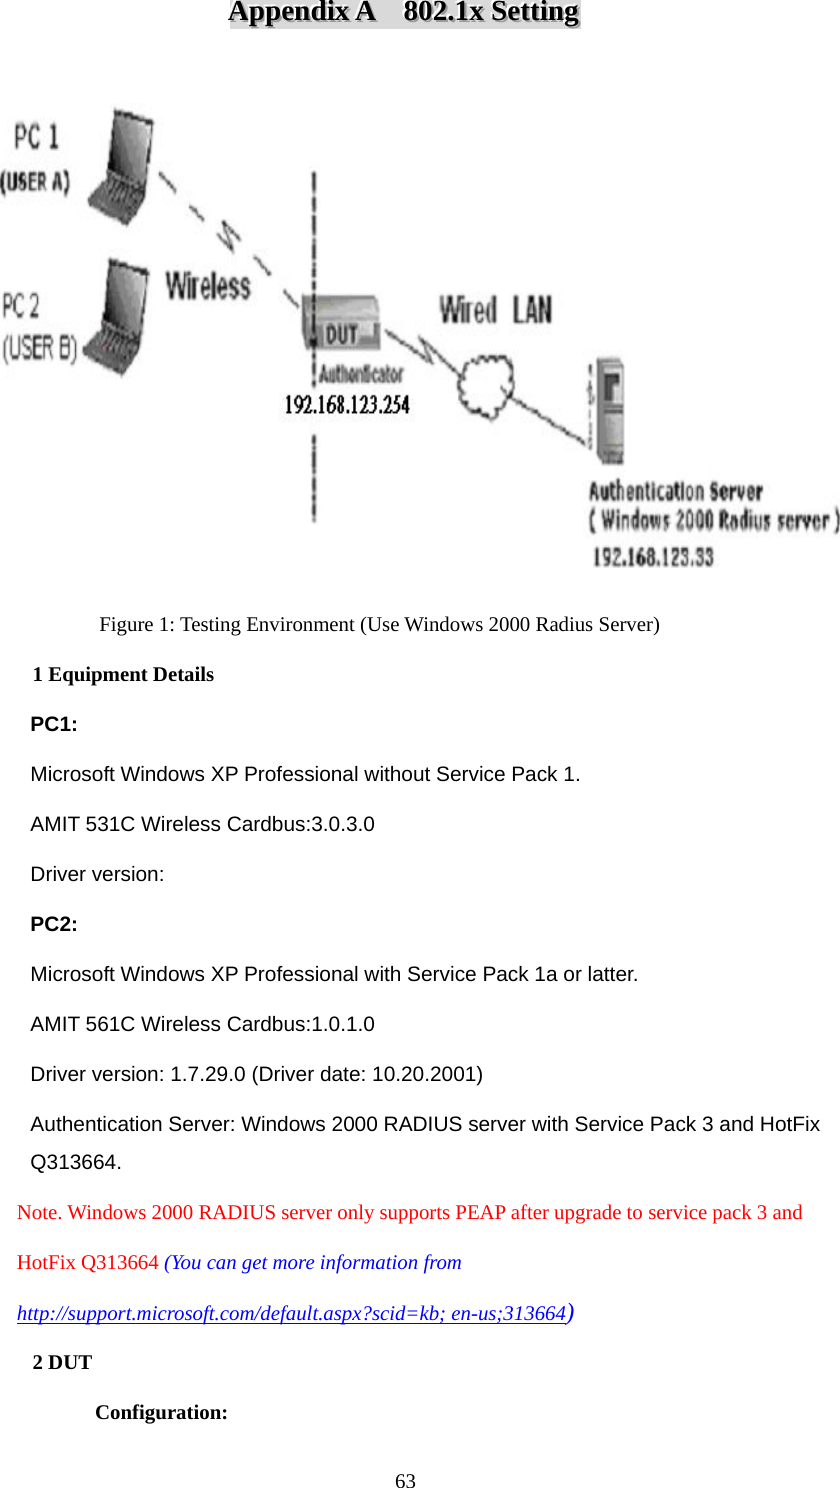 AAAppppppeeennndddiiixxx   AAA      888000222...111xxx   SSSeeettttttiiinnnggg     Figure 1: Testing Environment (Use Windows 2000 Radius Server) 1 Equipment Details PC1:  Microsoft Windows XP Professional without Service Pack 1. AMIT 531C Wireless Cardbus:3.0.3.0 Driver version:   PC2:  Microsoft Windows XP Professional with Service Pack 1a or latter. AMIT 561C Wireless Cardbus:1.0.1.0 Driver version: 1.7.29.0 (Driver date: 10.20.2001) Authentication Server: Windows 2000 RADIUS server with Service Pack 3 and HotFix Q313664.     Note. Windows 2000 RADIUS server only supports PEAP after upgrade to service pack 3 and         HotFix Q313664 (You can get more information from         http://support.microsoft.com/default.aspx?scid=kb; en-us;313664) 2 DUT   Configuration:  63